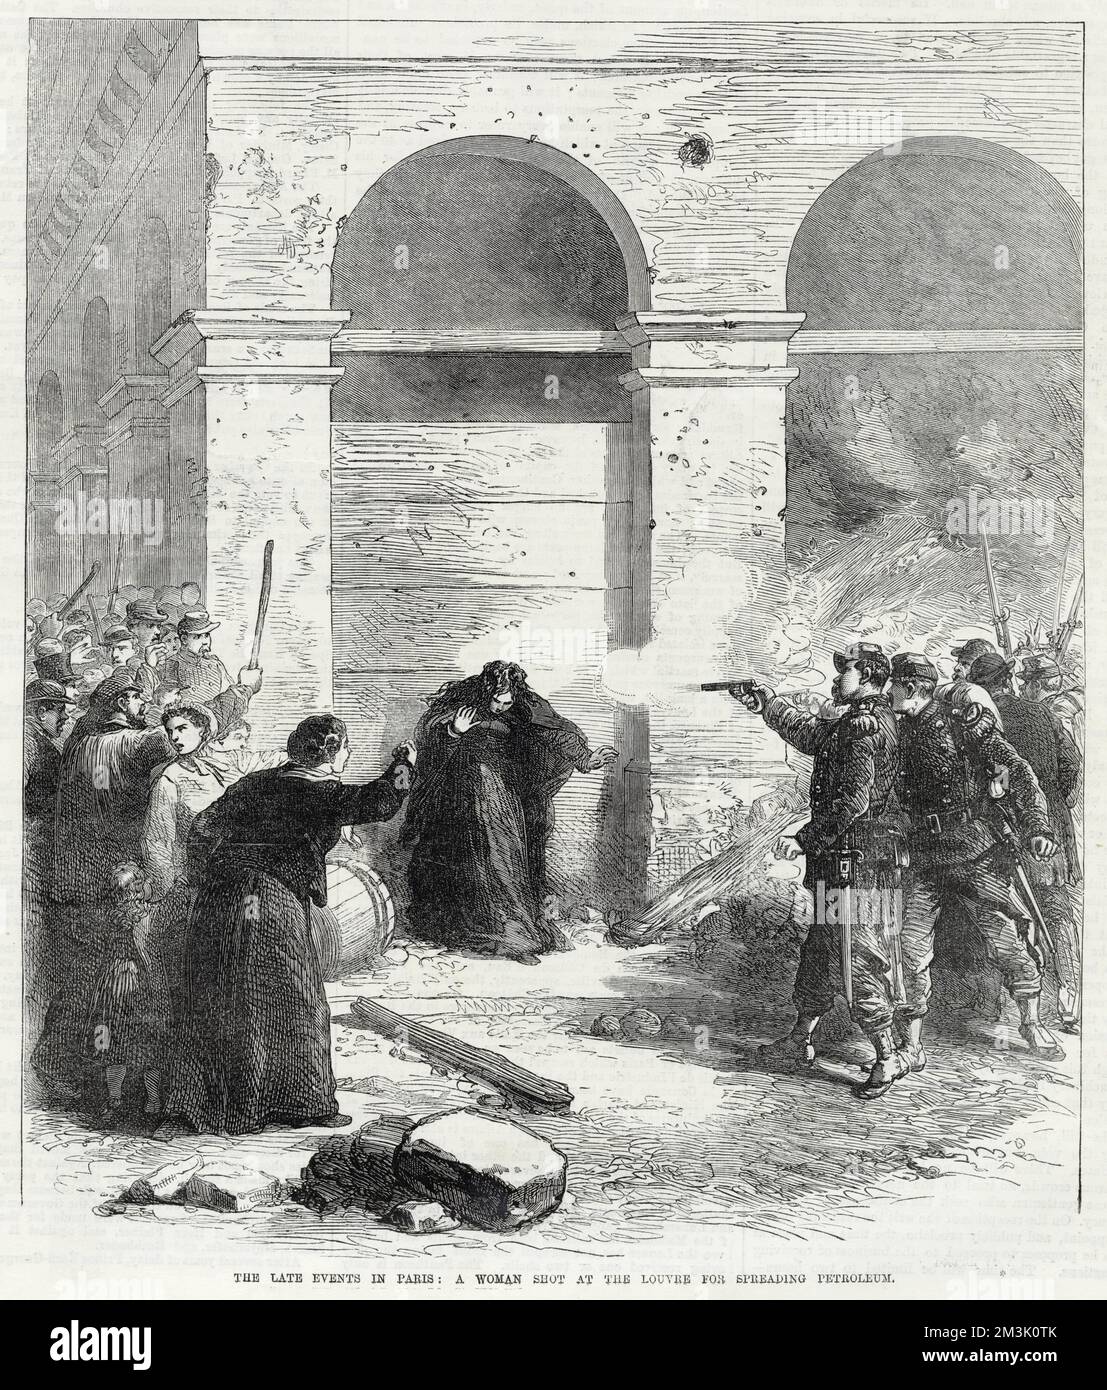 Execution of a female Communard, believed to be a 'Petroleuse', at the Louvre, during the Paris Commune.  As the Communard situation deteriorated and they retreated, they resorted to setting fire to parts of Paris. The Versailles Government troops were merciless, when they caught anyone they suspected of being a Communard they were summarily shot. Stock Photo